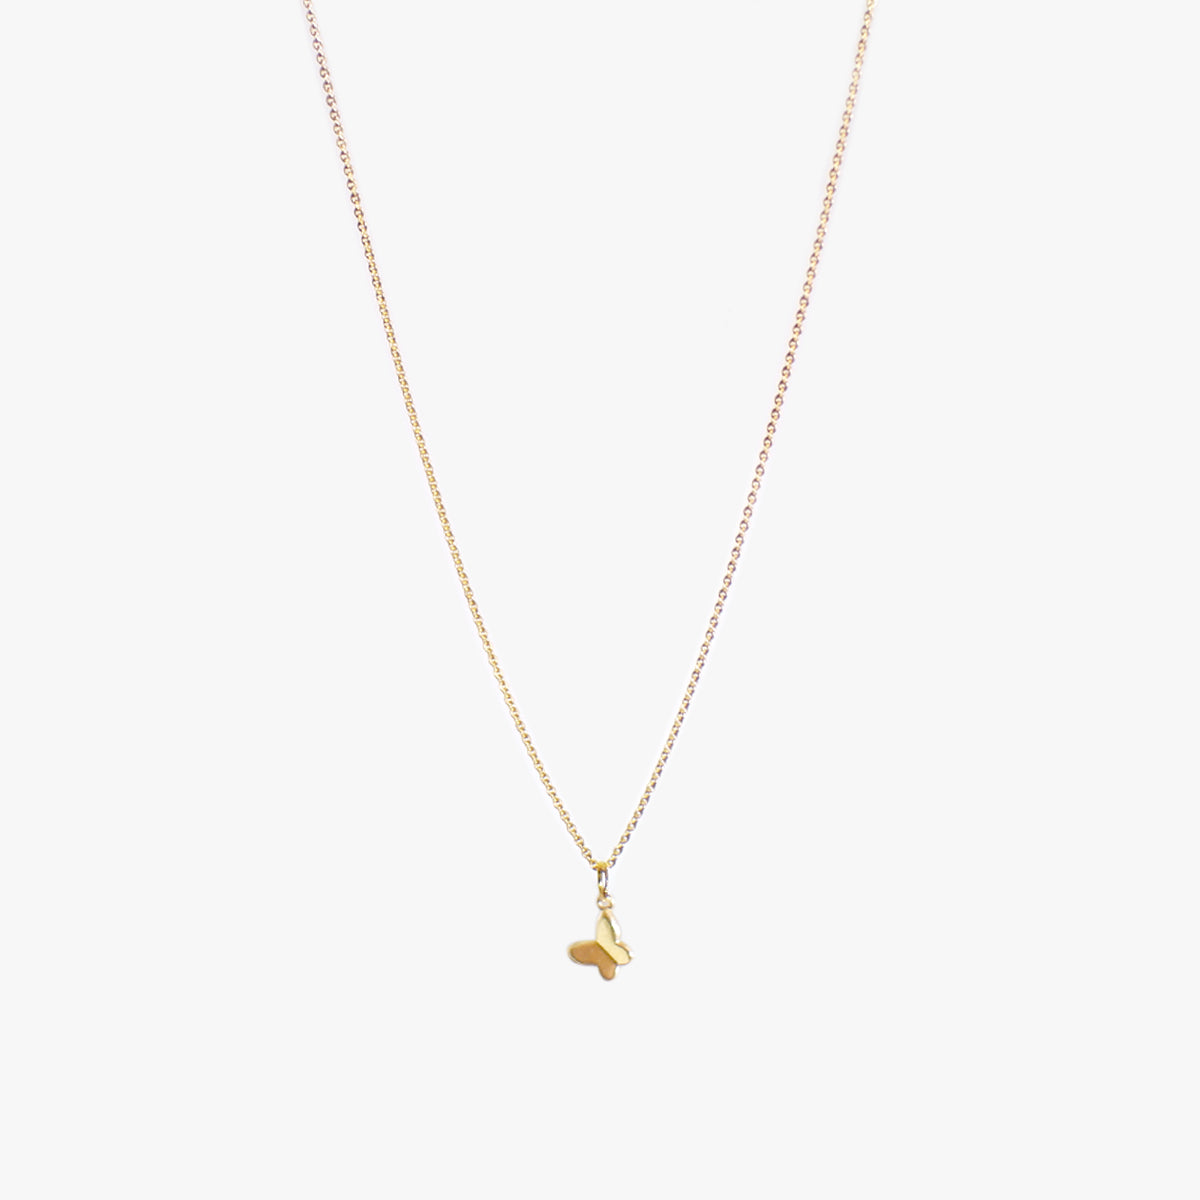 The Sweet Butterfly Charm in Solid Gold